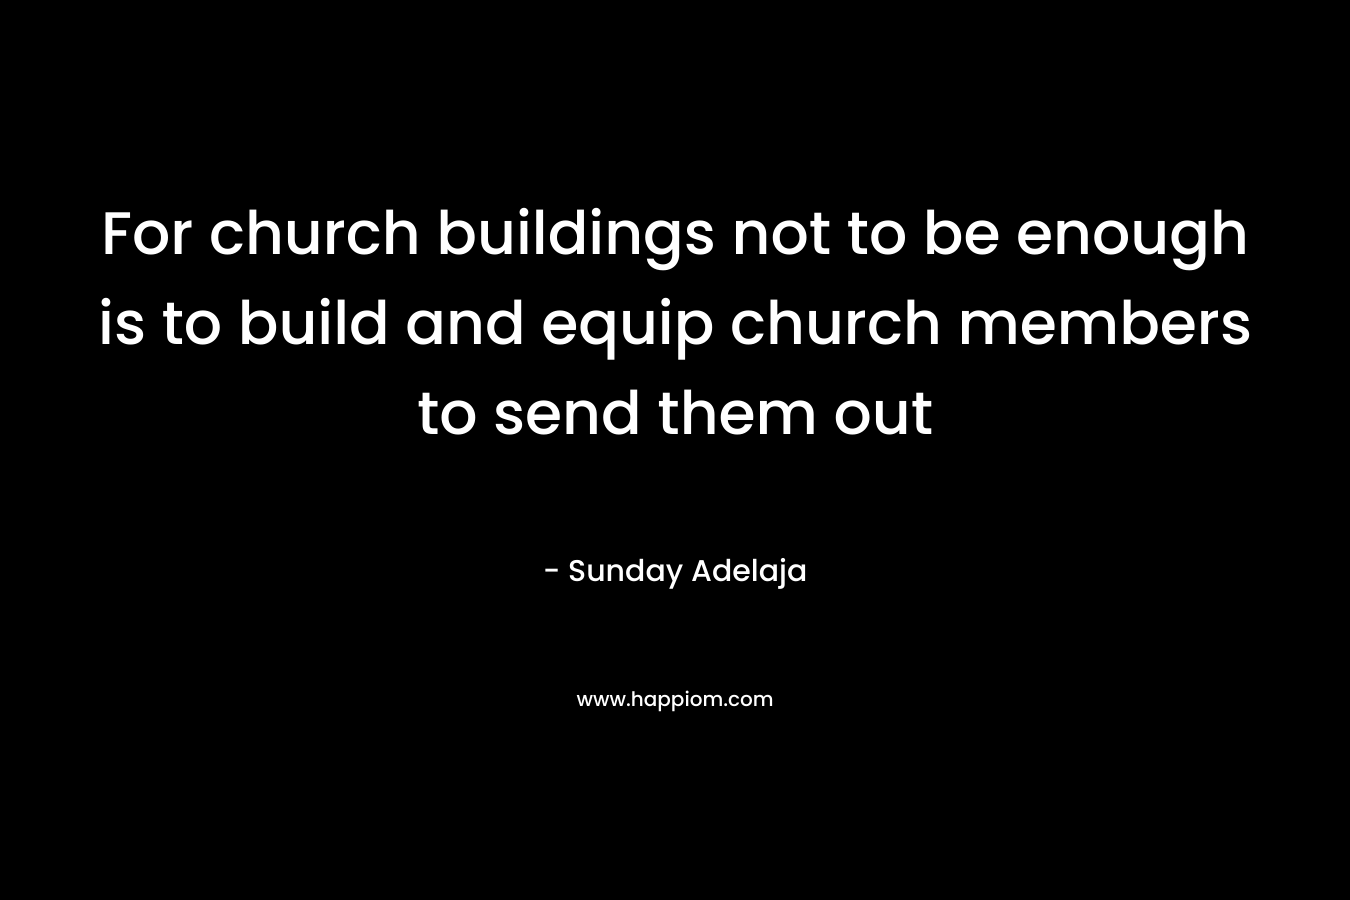 For church buildings not to be enough is to build and equip church members to send them out